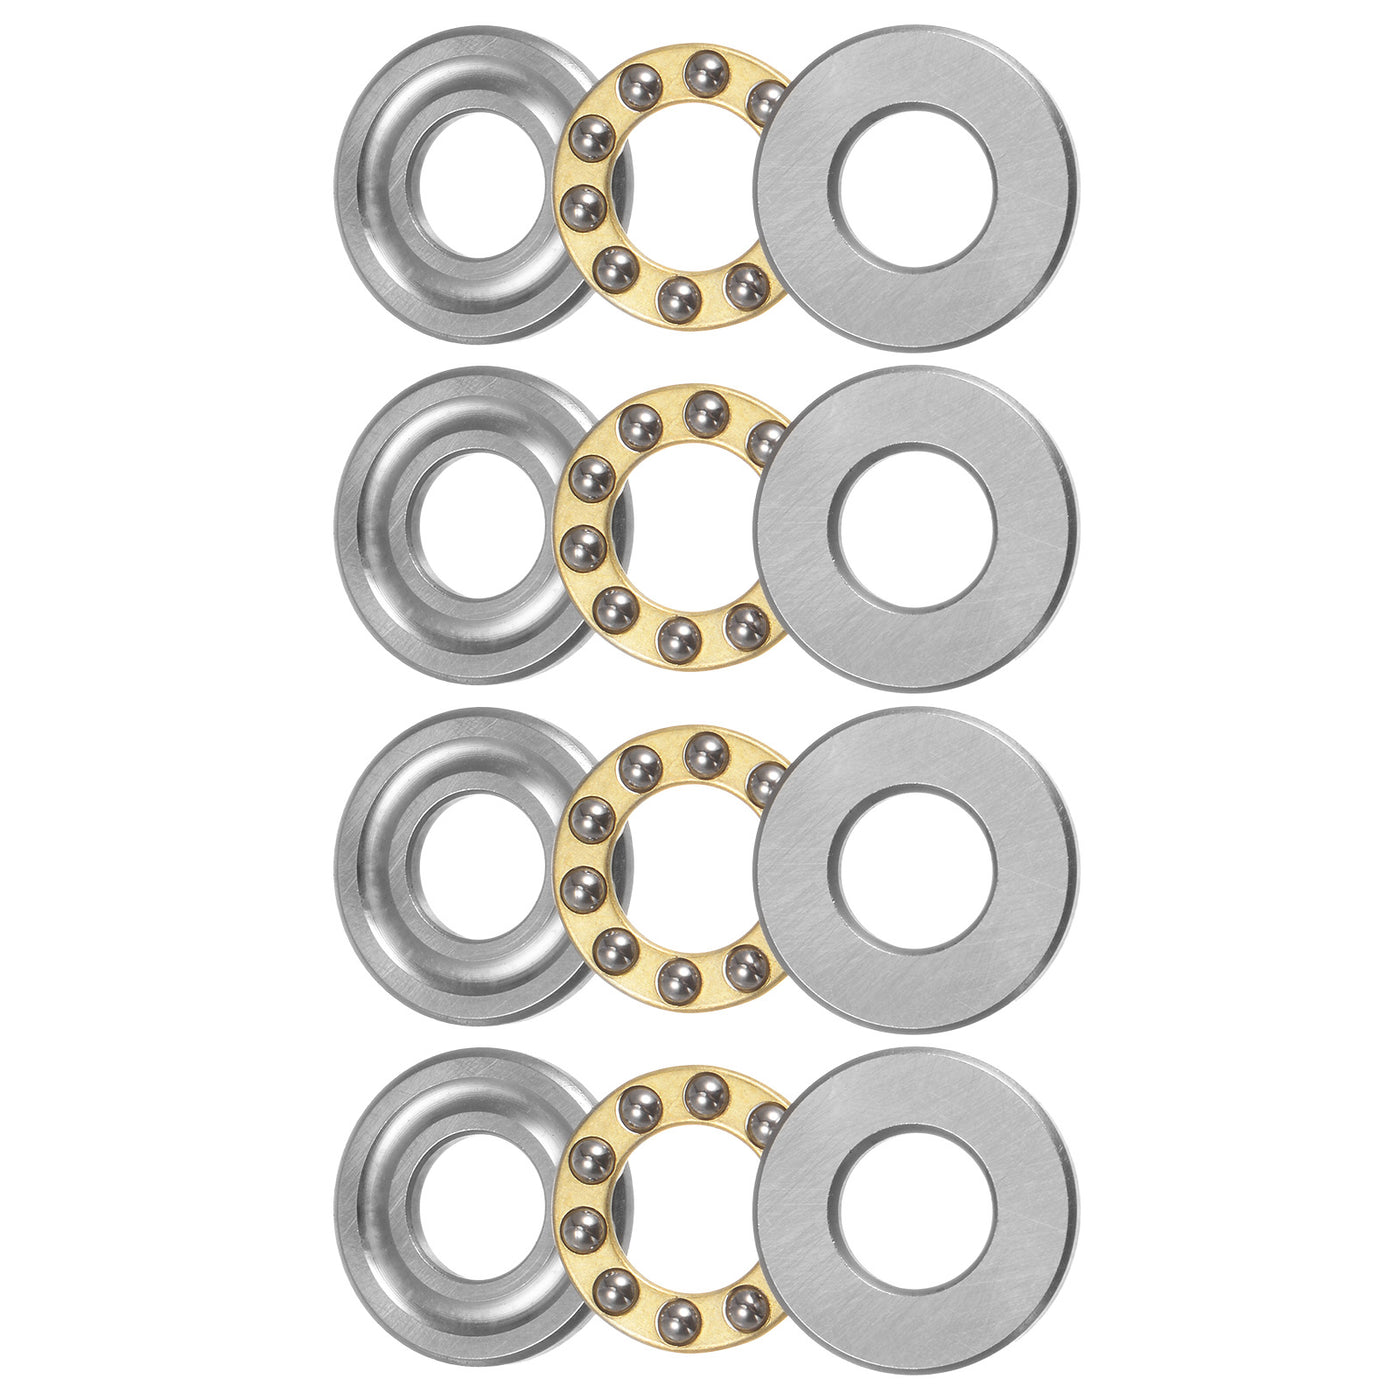 uxcell Uxcell F9-20M Thrust Ball Bearing 9x20x7mm Brass with Washers 4pcs